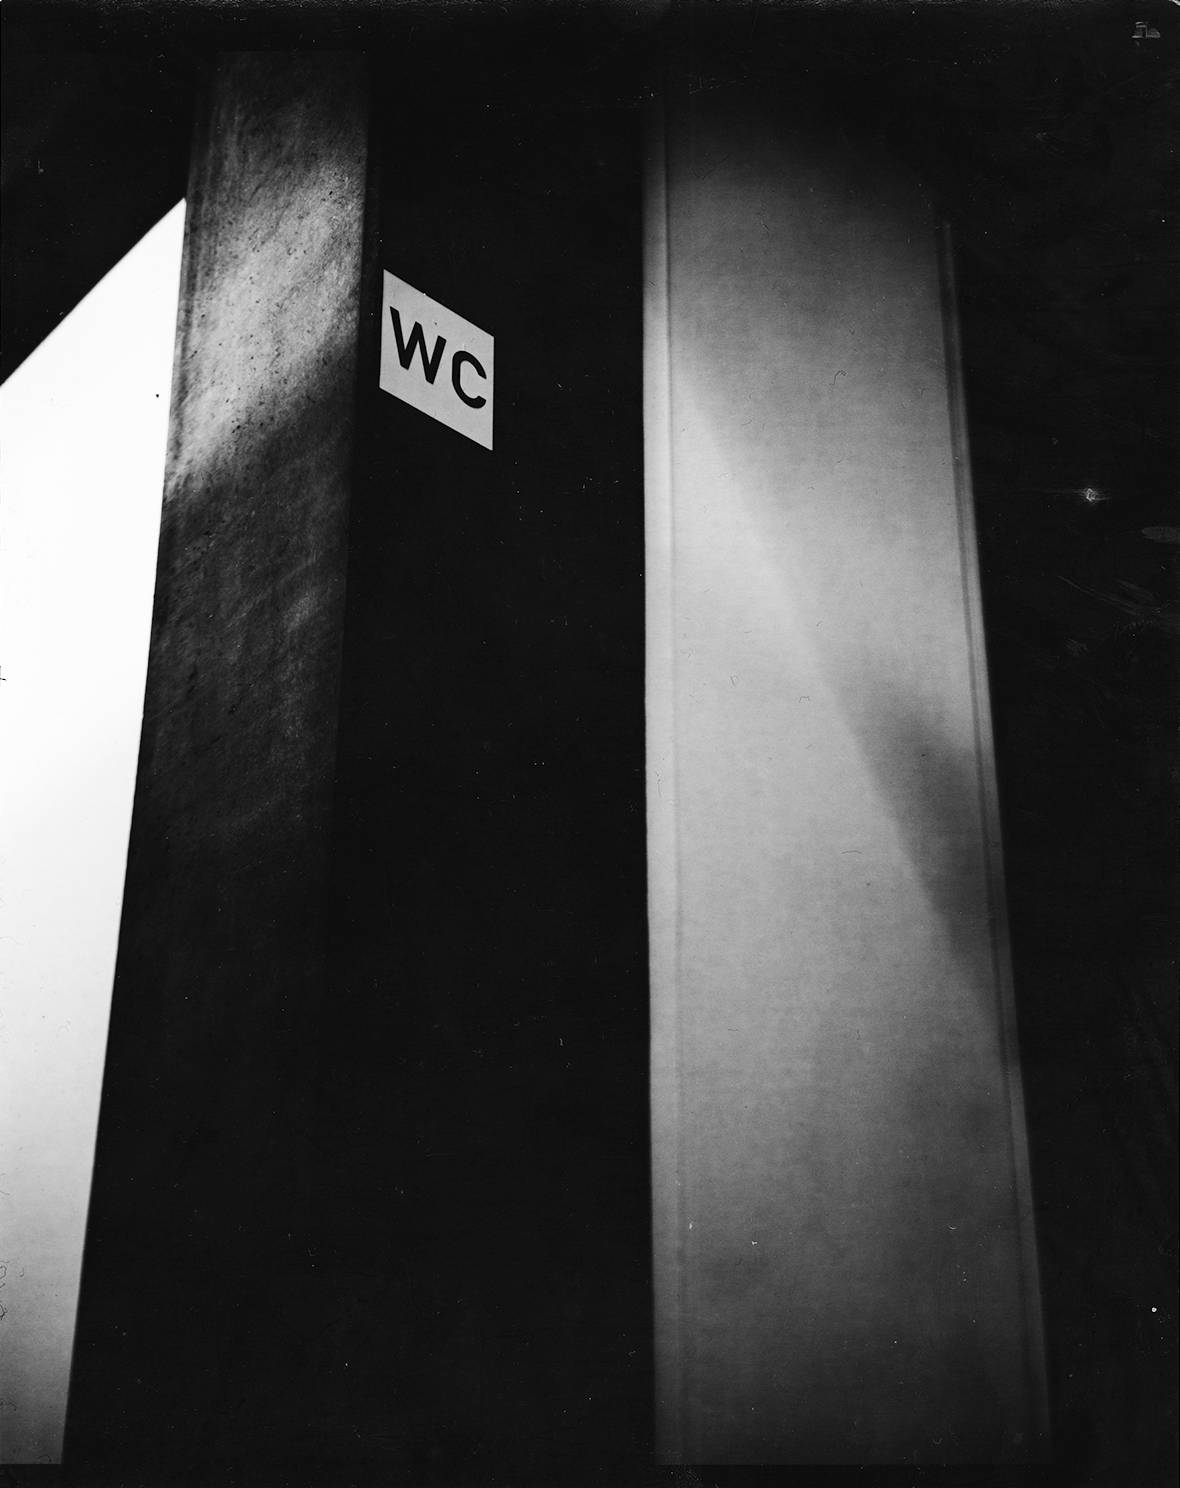 a 'WC'-sign on a concrete column in high contrast analog black and white